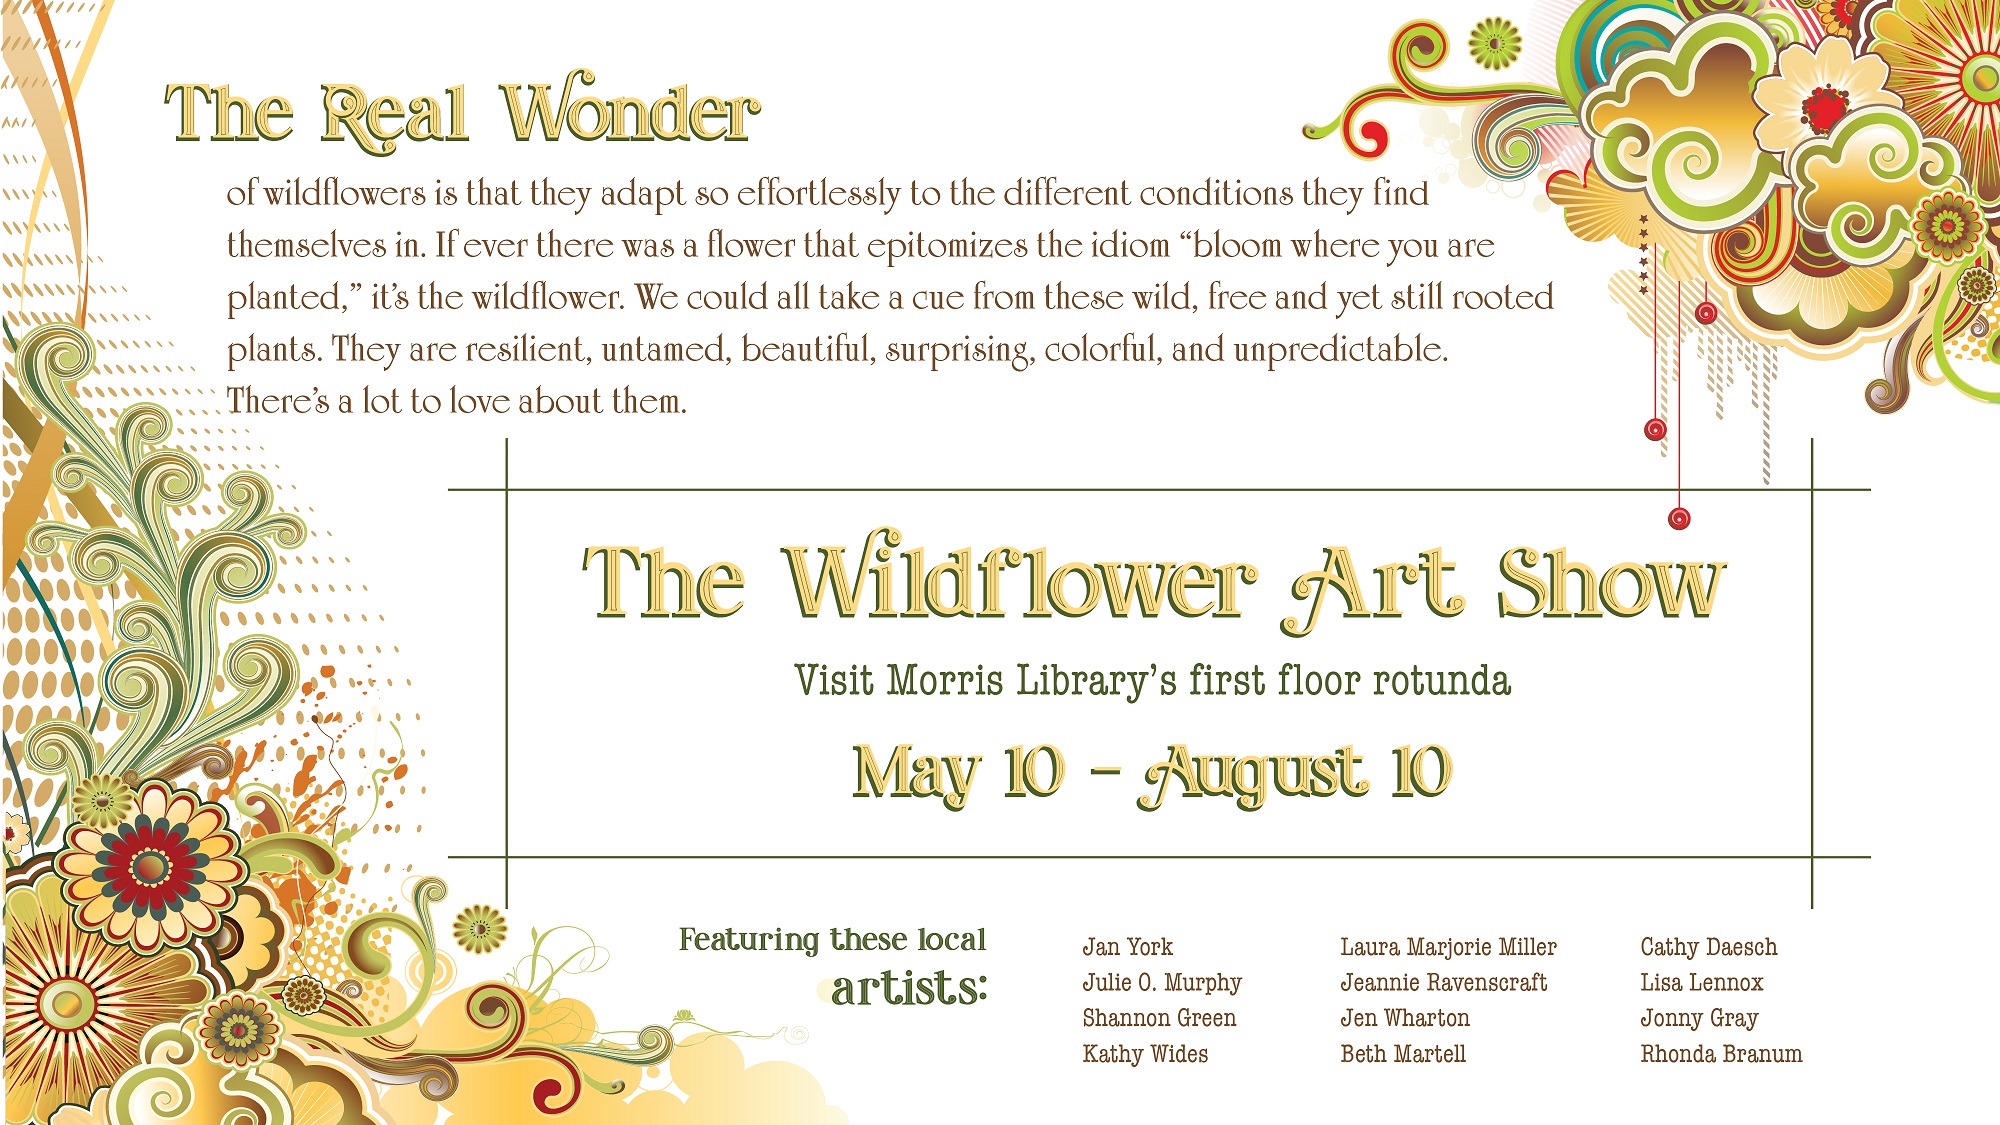 Visit the Wildflower Show in the Morris Library first floor rotunda, May 10 - August 10, 2024. in the Morris Library first floor rotunda, May 10 - August 10, 2024. Featuringlocal artists Jan York, Kathy Wides, Jen Wharton, Jeannie Ravenscraft, Julie O. Murphy, Laura Marjorie Miller, Beth Martell, Lisa Lennox, Shannon Green, Jonny Gray, Cathy Daesch, and Rhonda Branum. The real wonder of wildflowers is that they adapt so effortlessly to the different conditions they find themselves in. If ever there was a flower that epitomizes the idiom “bloom where you are planted,” it’s the wildflower. We could all take a cue from these wild, free and yet still rooted plants. They are resilient, untamed, beautiful, surprising, colorful, and unpredictable. There’s a lot to love about them.